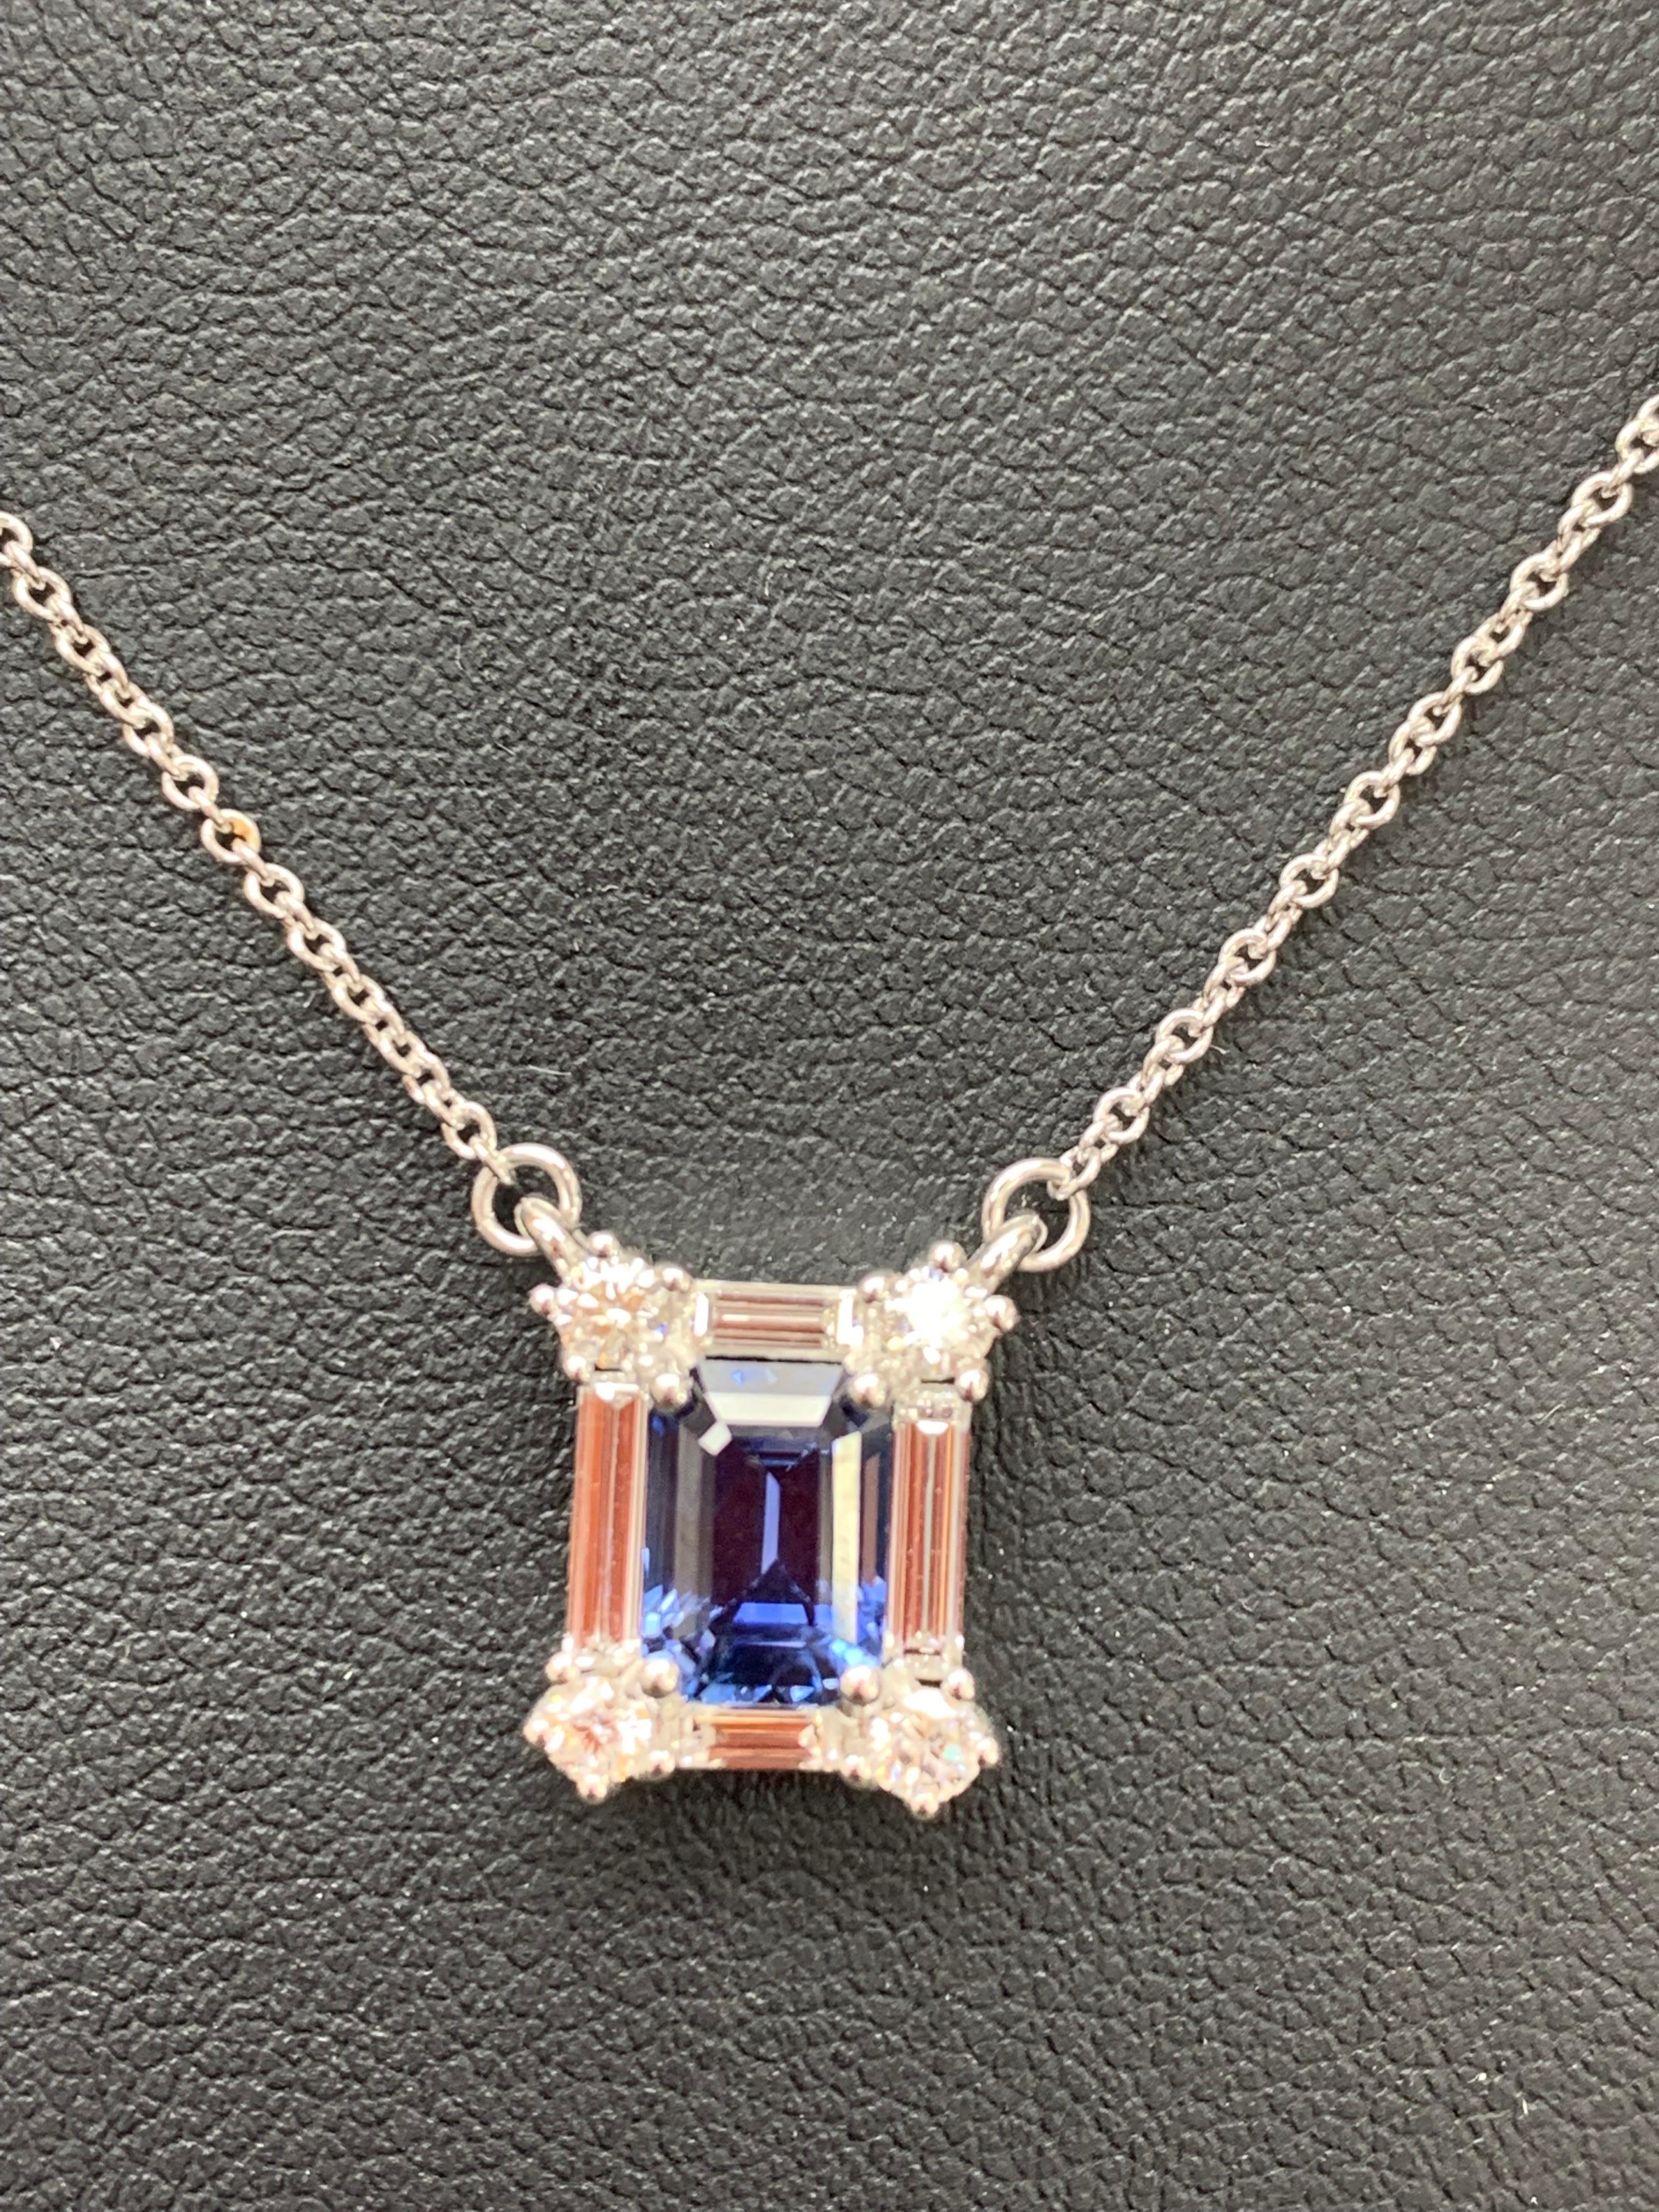 Modern 2.02 Carat Emerald Cut Sapphire and Diamond Pendant Necklace in 14K White Gold For Sale